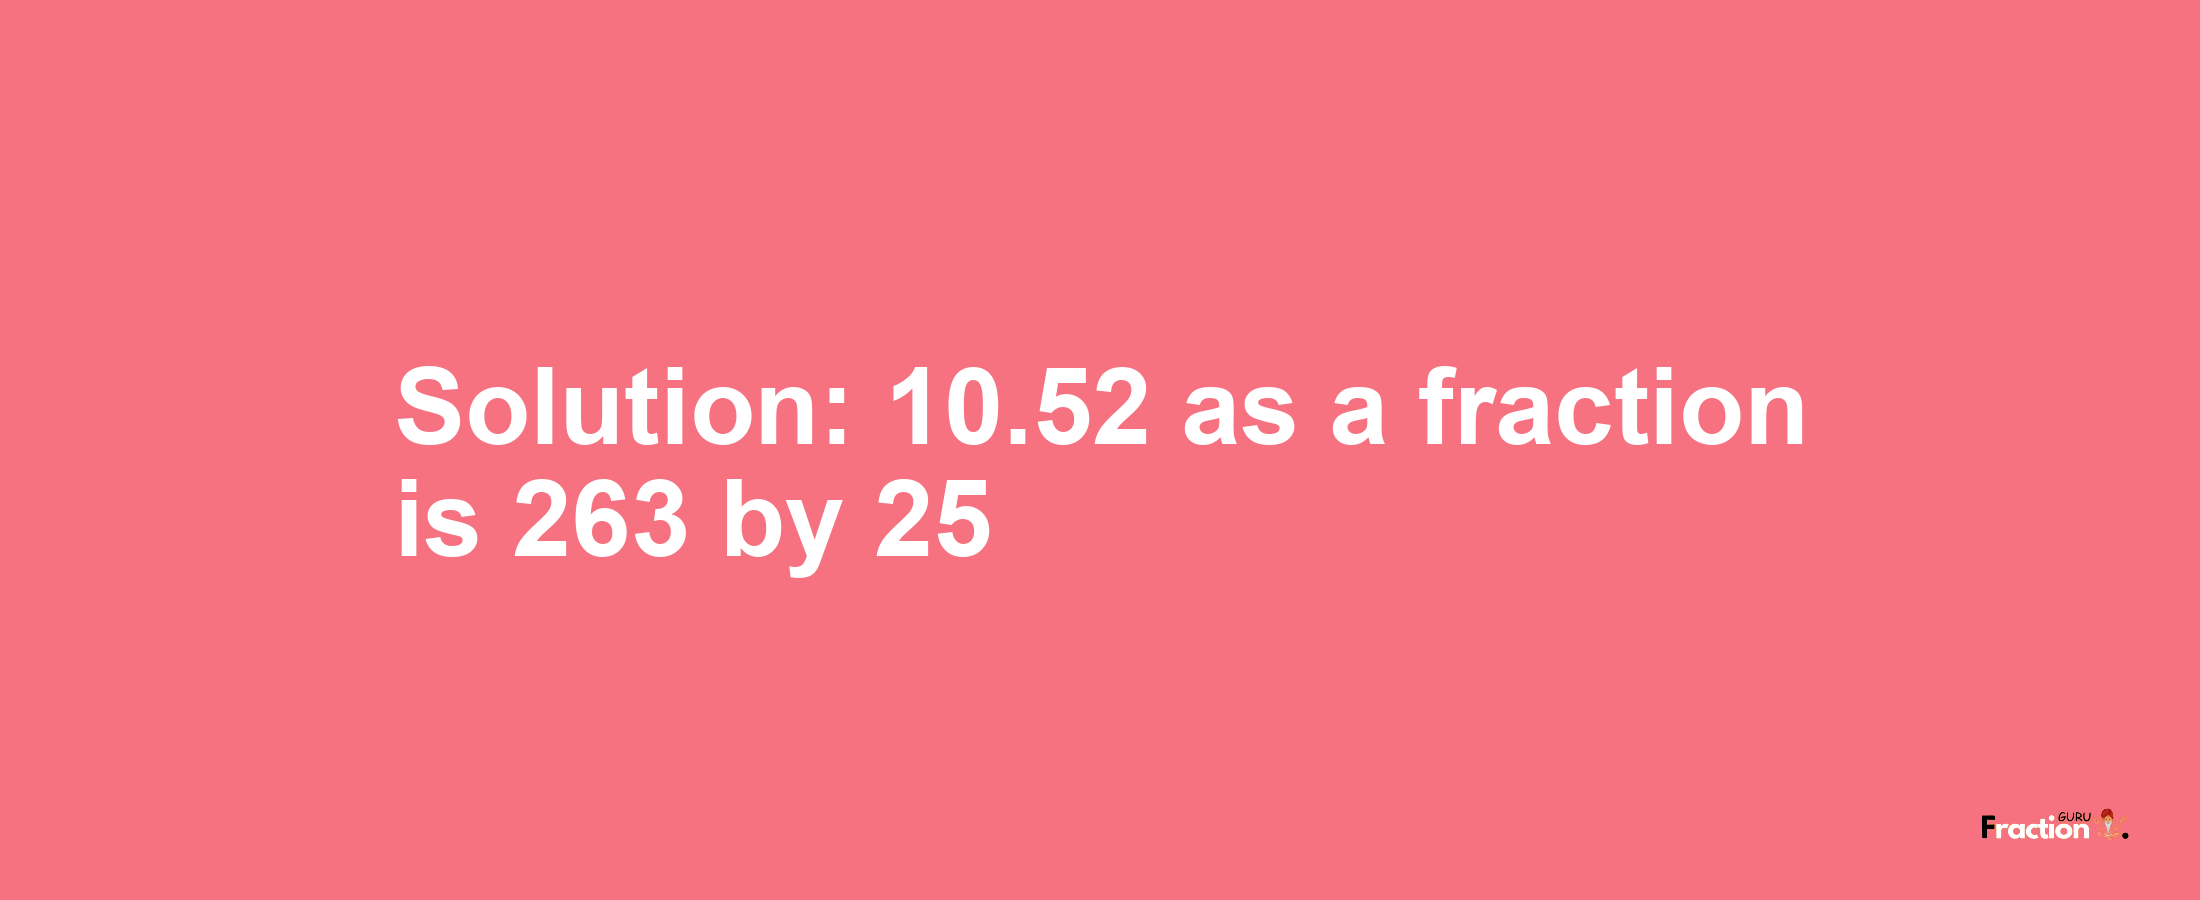 Solution:10.52 as a fraction is 263/25